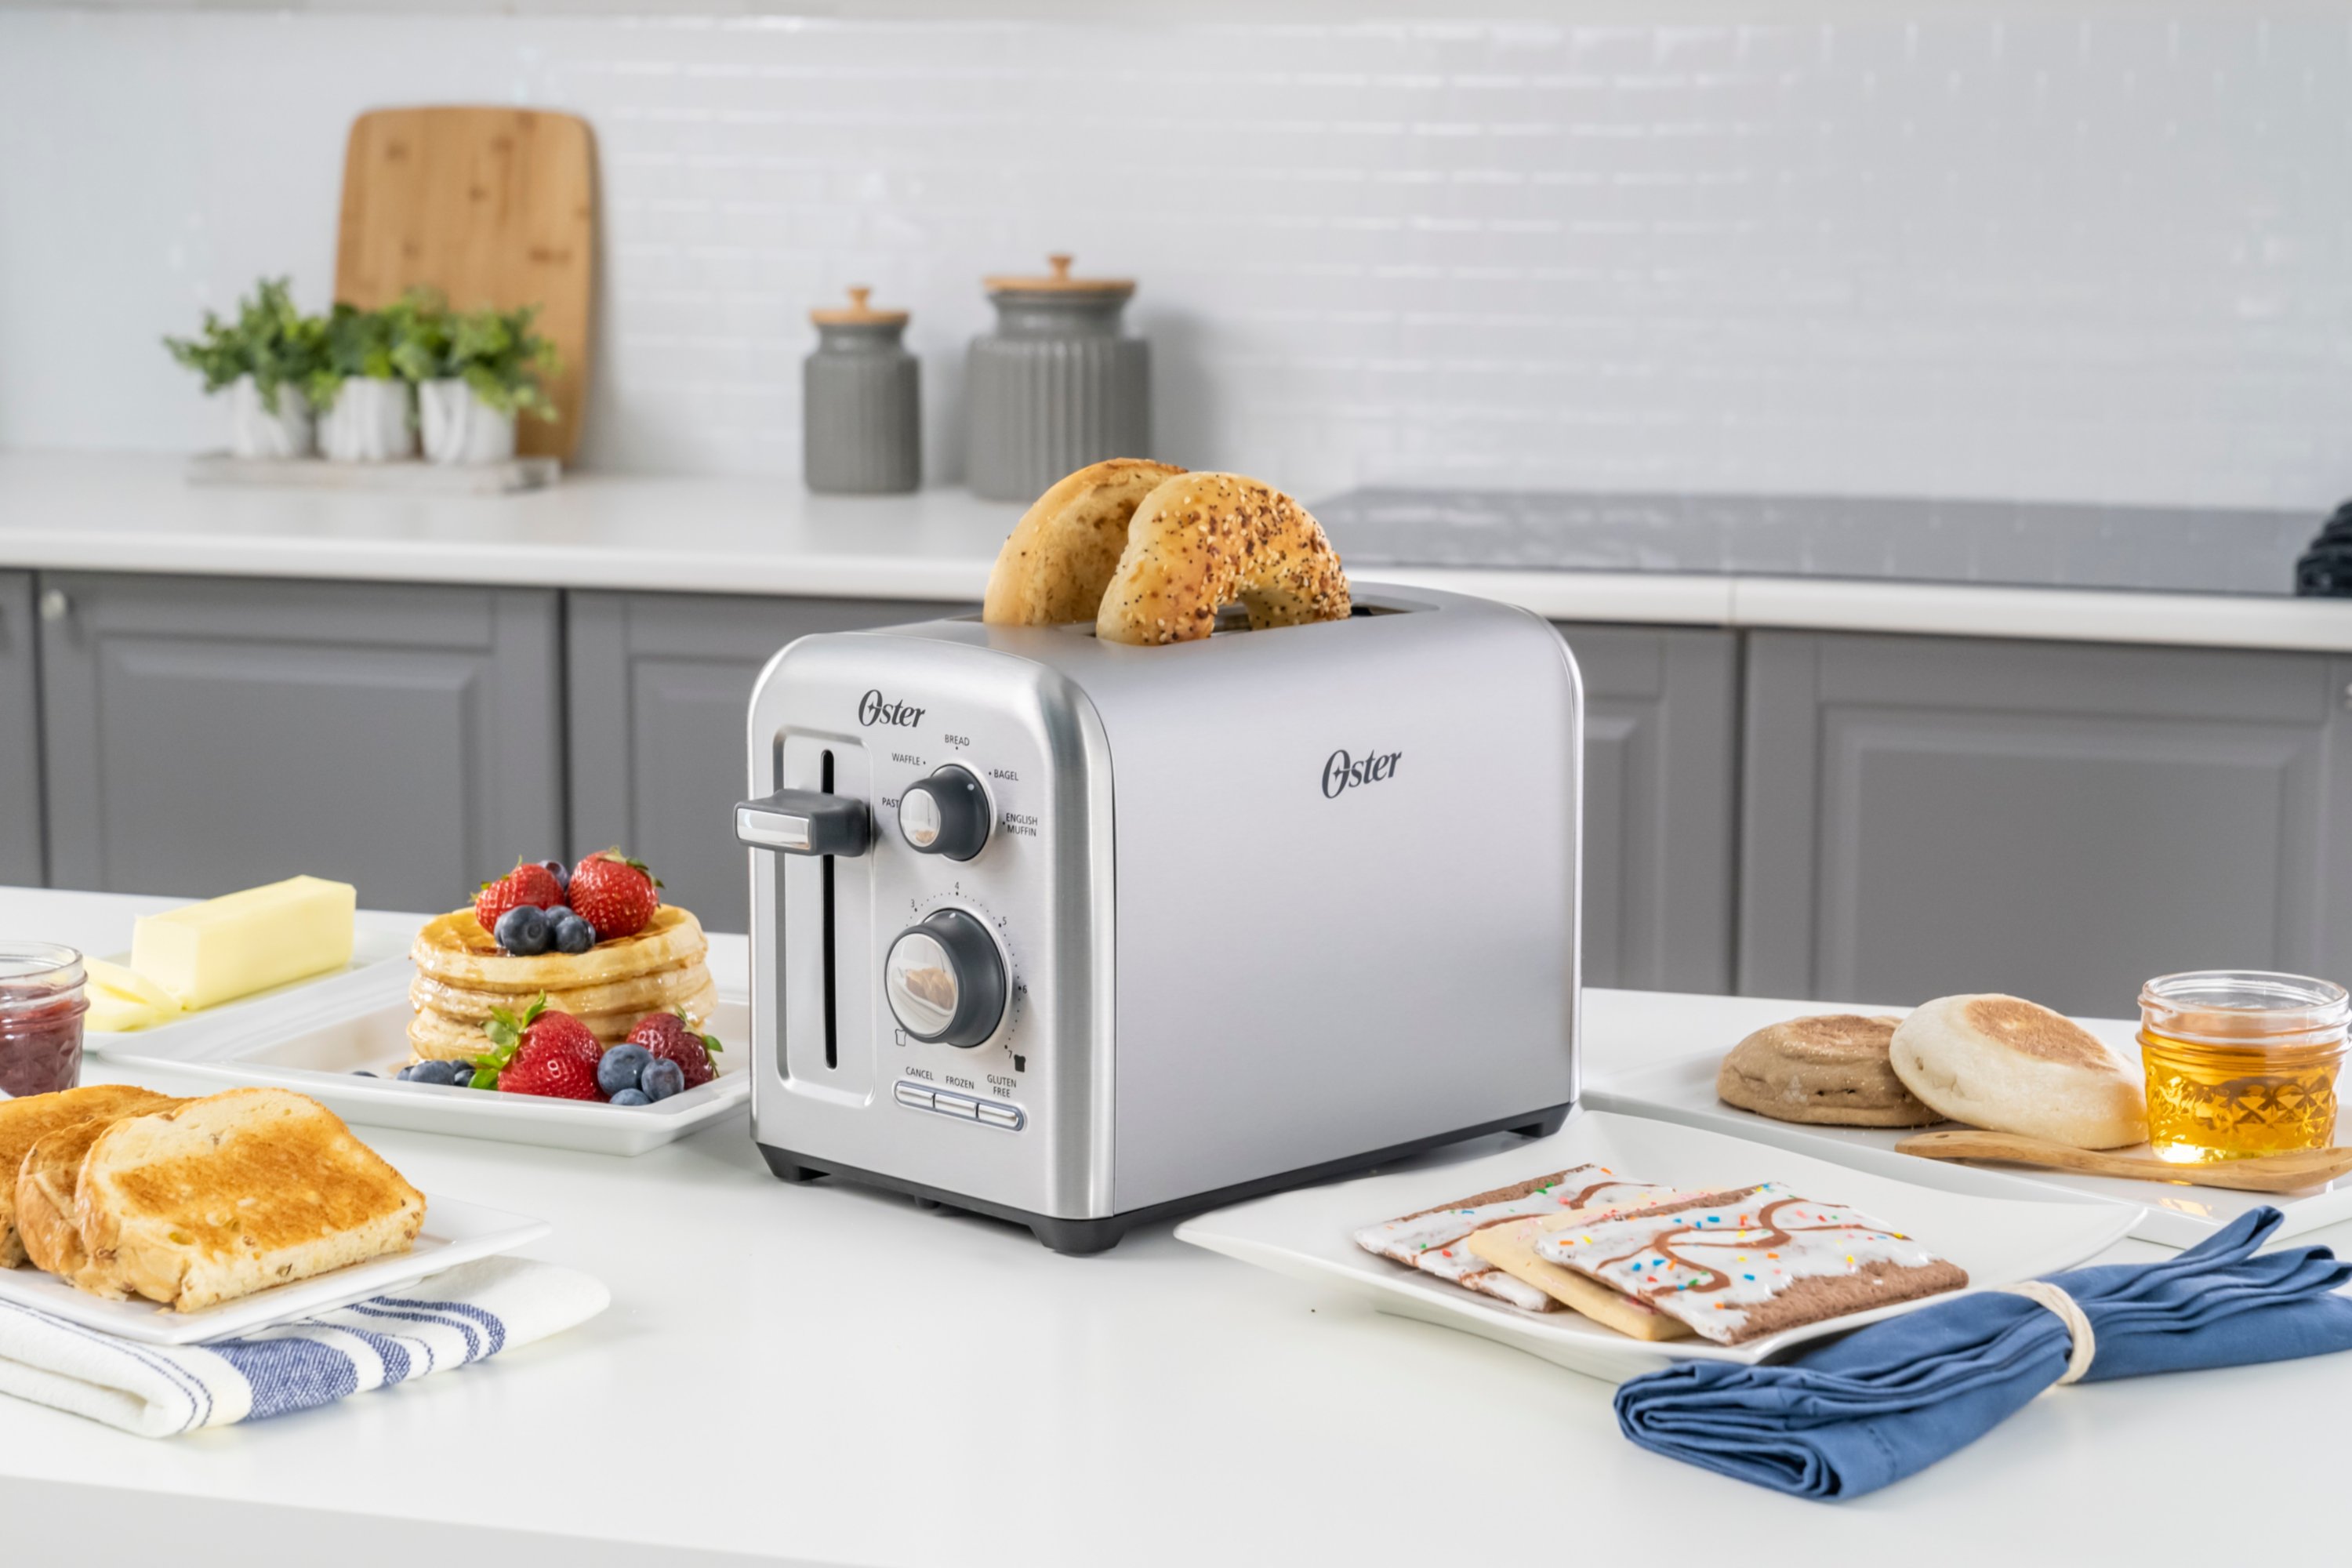  Oster Precision Select 2-Slice Toaster: Home & Kitchen